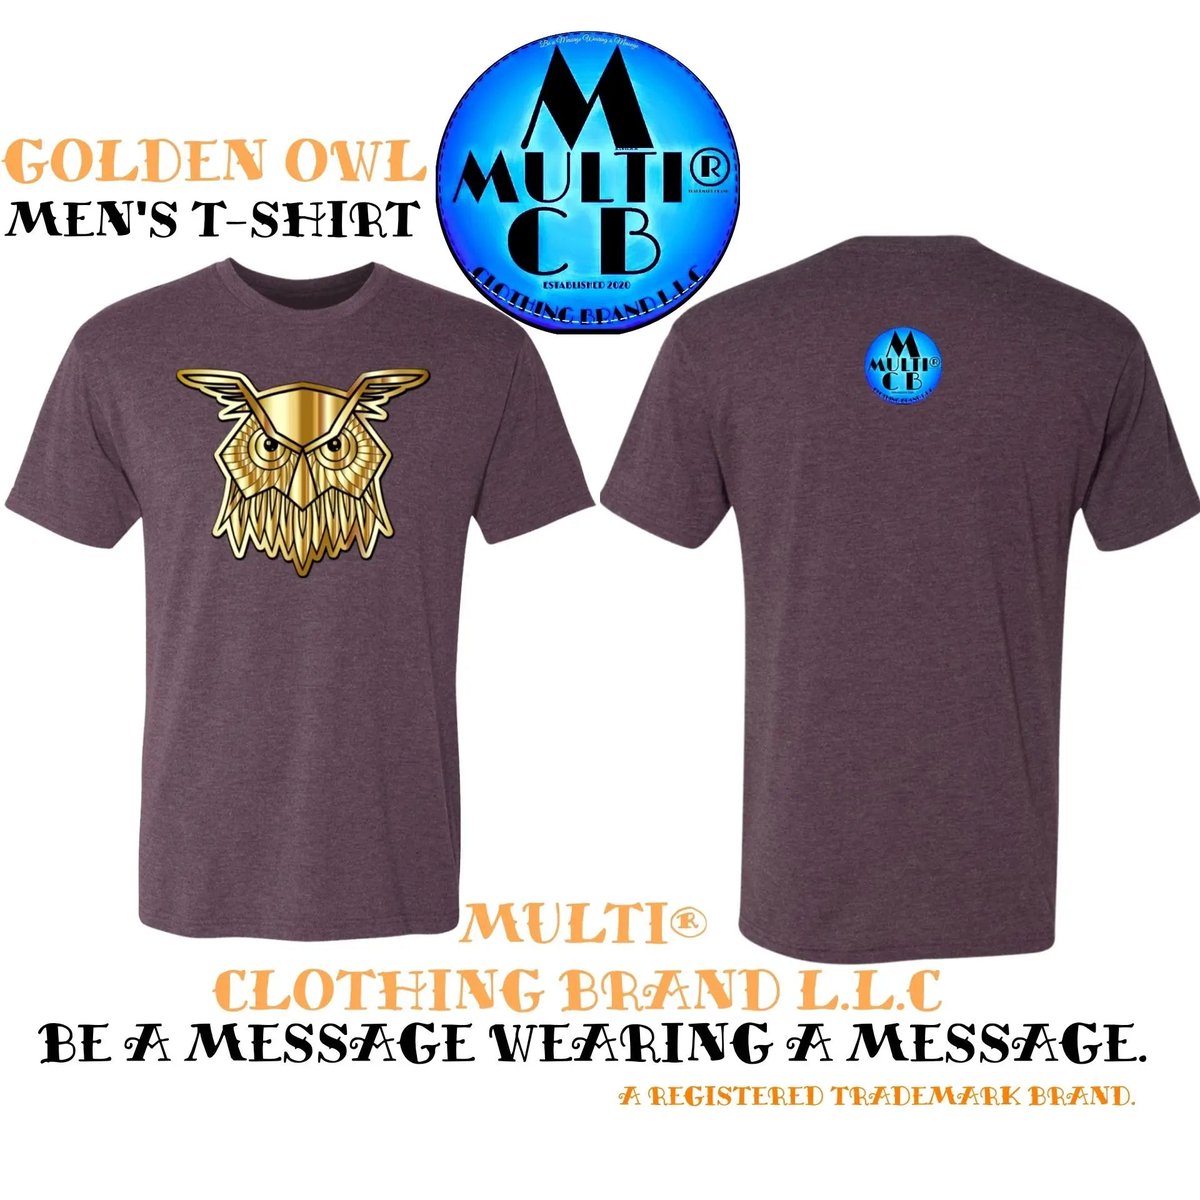 Multi - Golden Owl - Men's Vintage Triblend T-Shirt Clothing – Multi Clothing Brand L L C®
multiclothingbrand.com/products/golde…
#clothingbrand #clothingline #clothingstore #clothingcompany #sustainable #affordable #premium #clothings #ethical #streetclothing #streetwear #multi #clothing